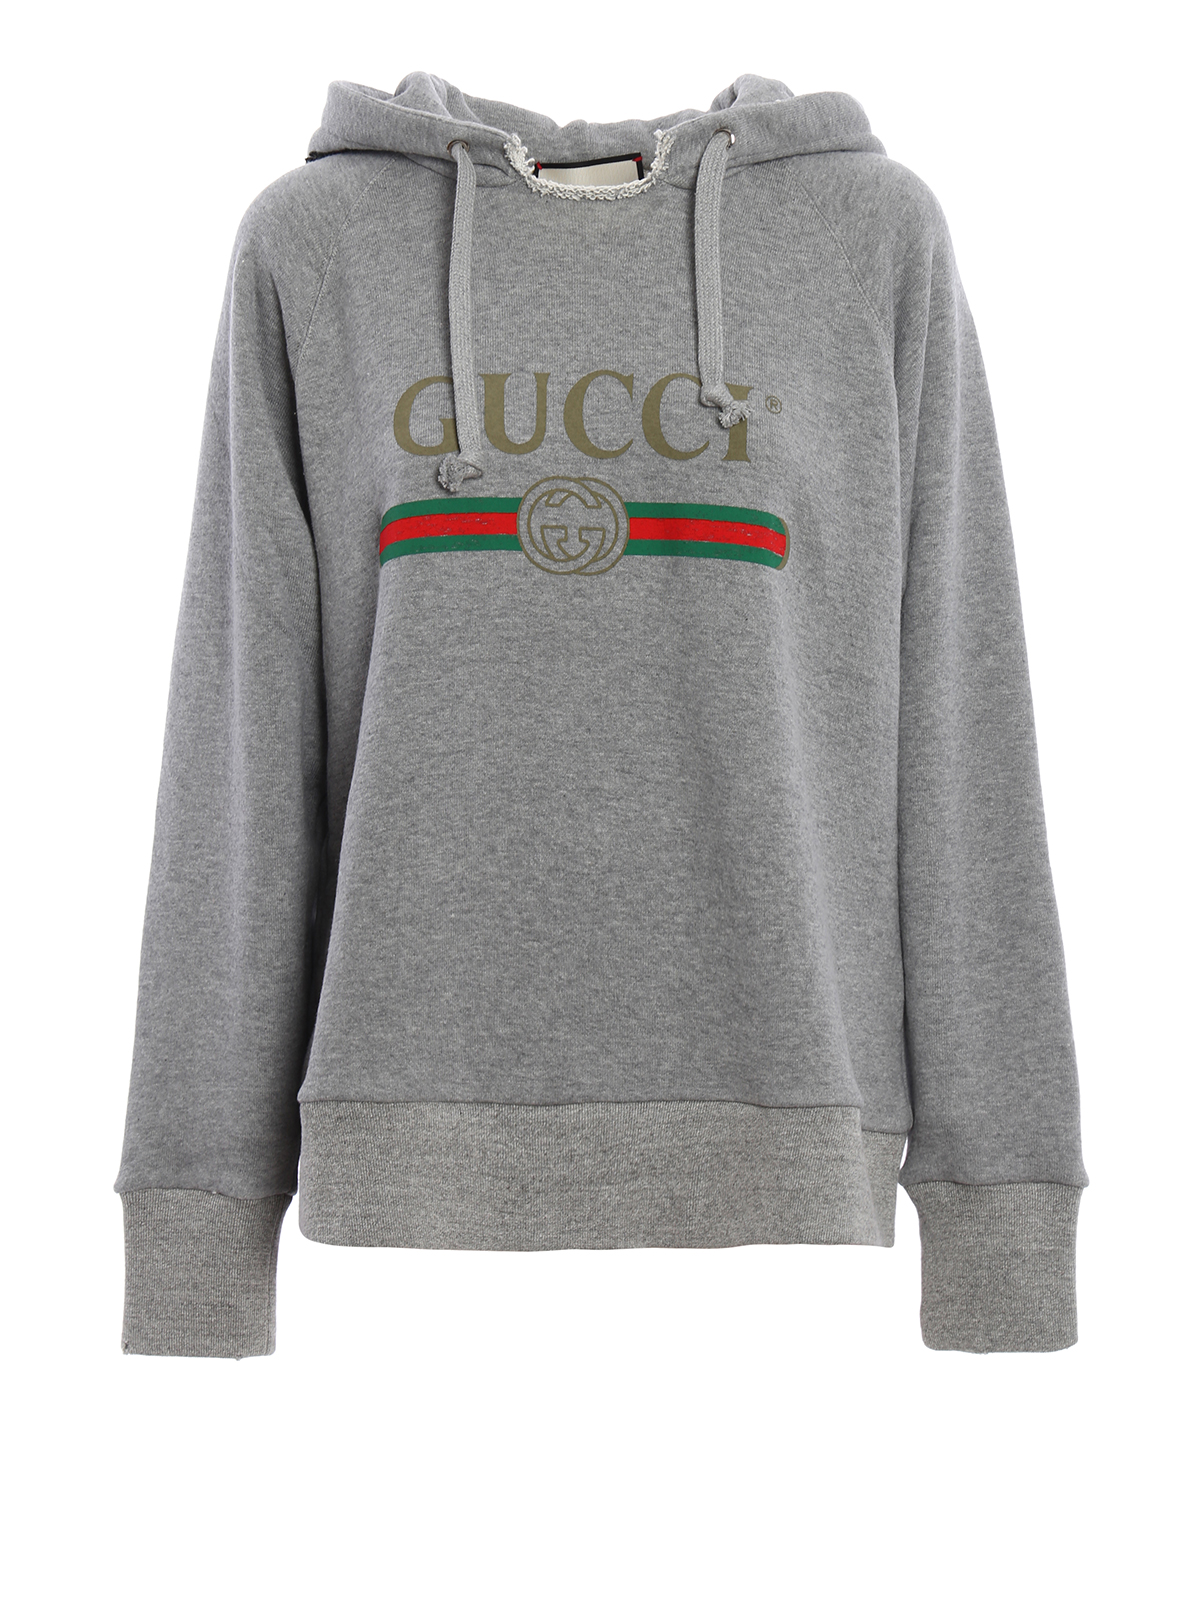 gucci blind for love hoodie taylor swift